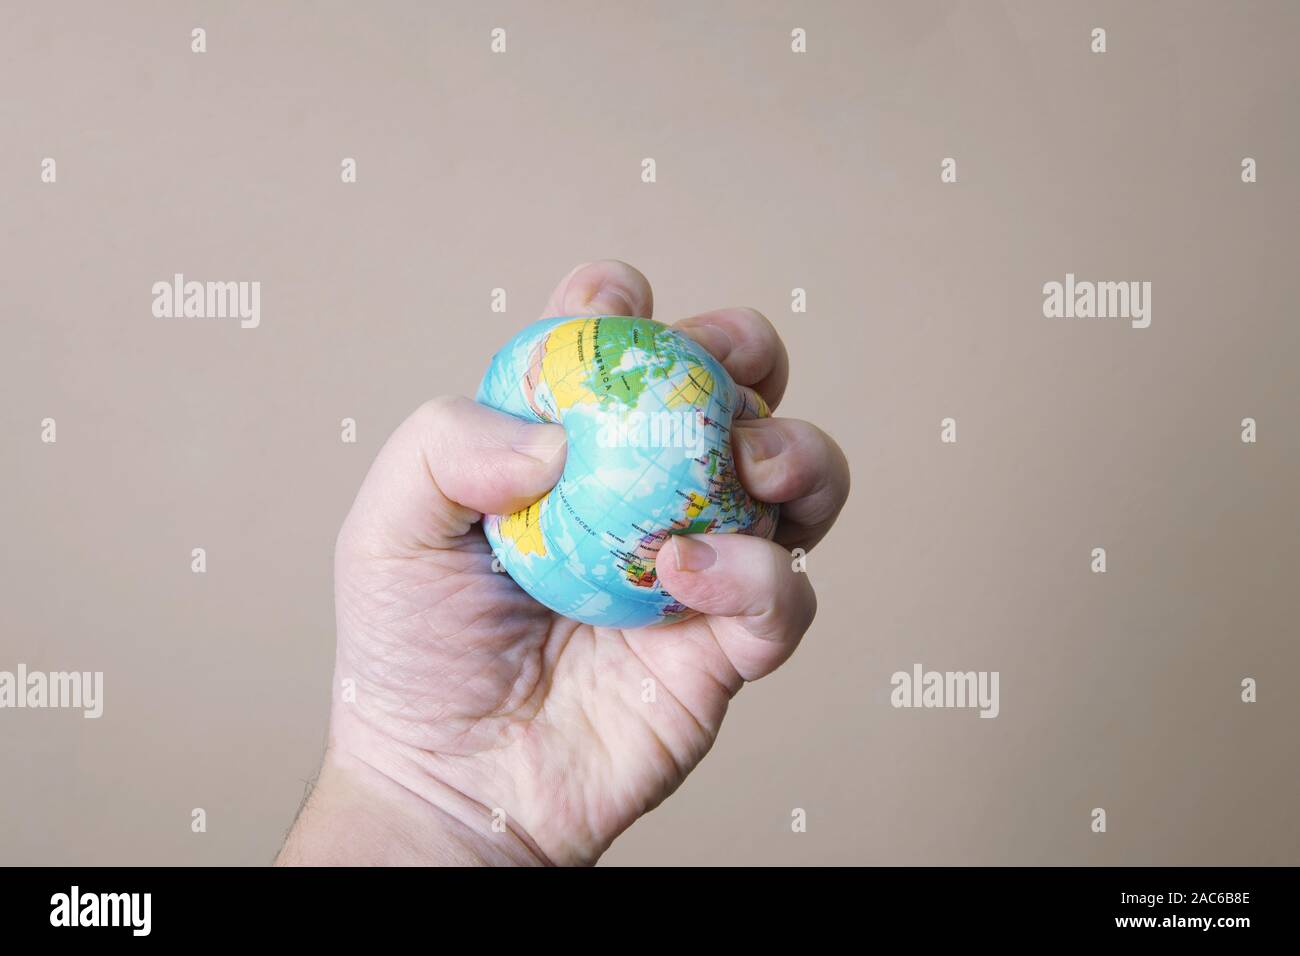 ecocide concept - hand crushing or squashing globe of planet earth - destruction of the environment Stock Photo